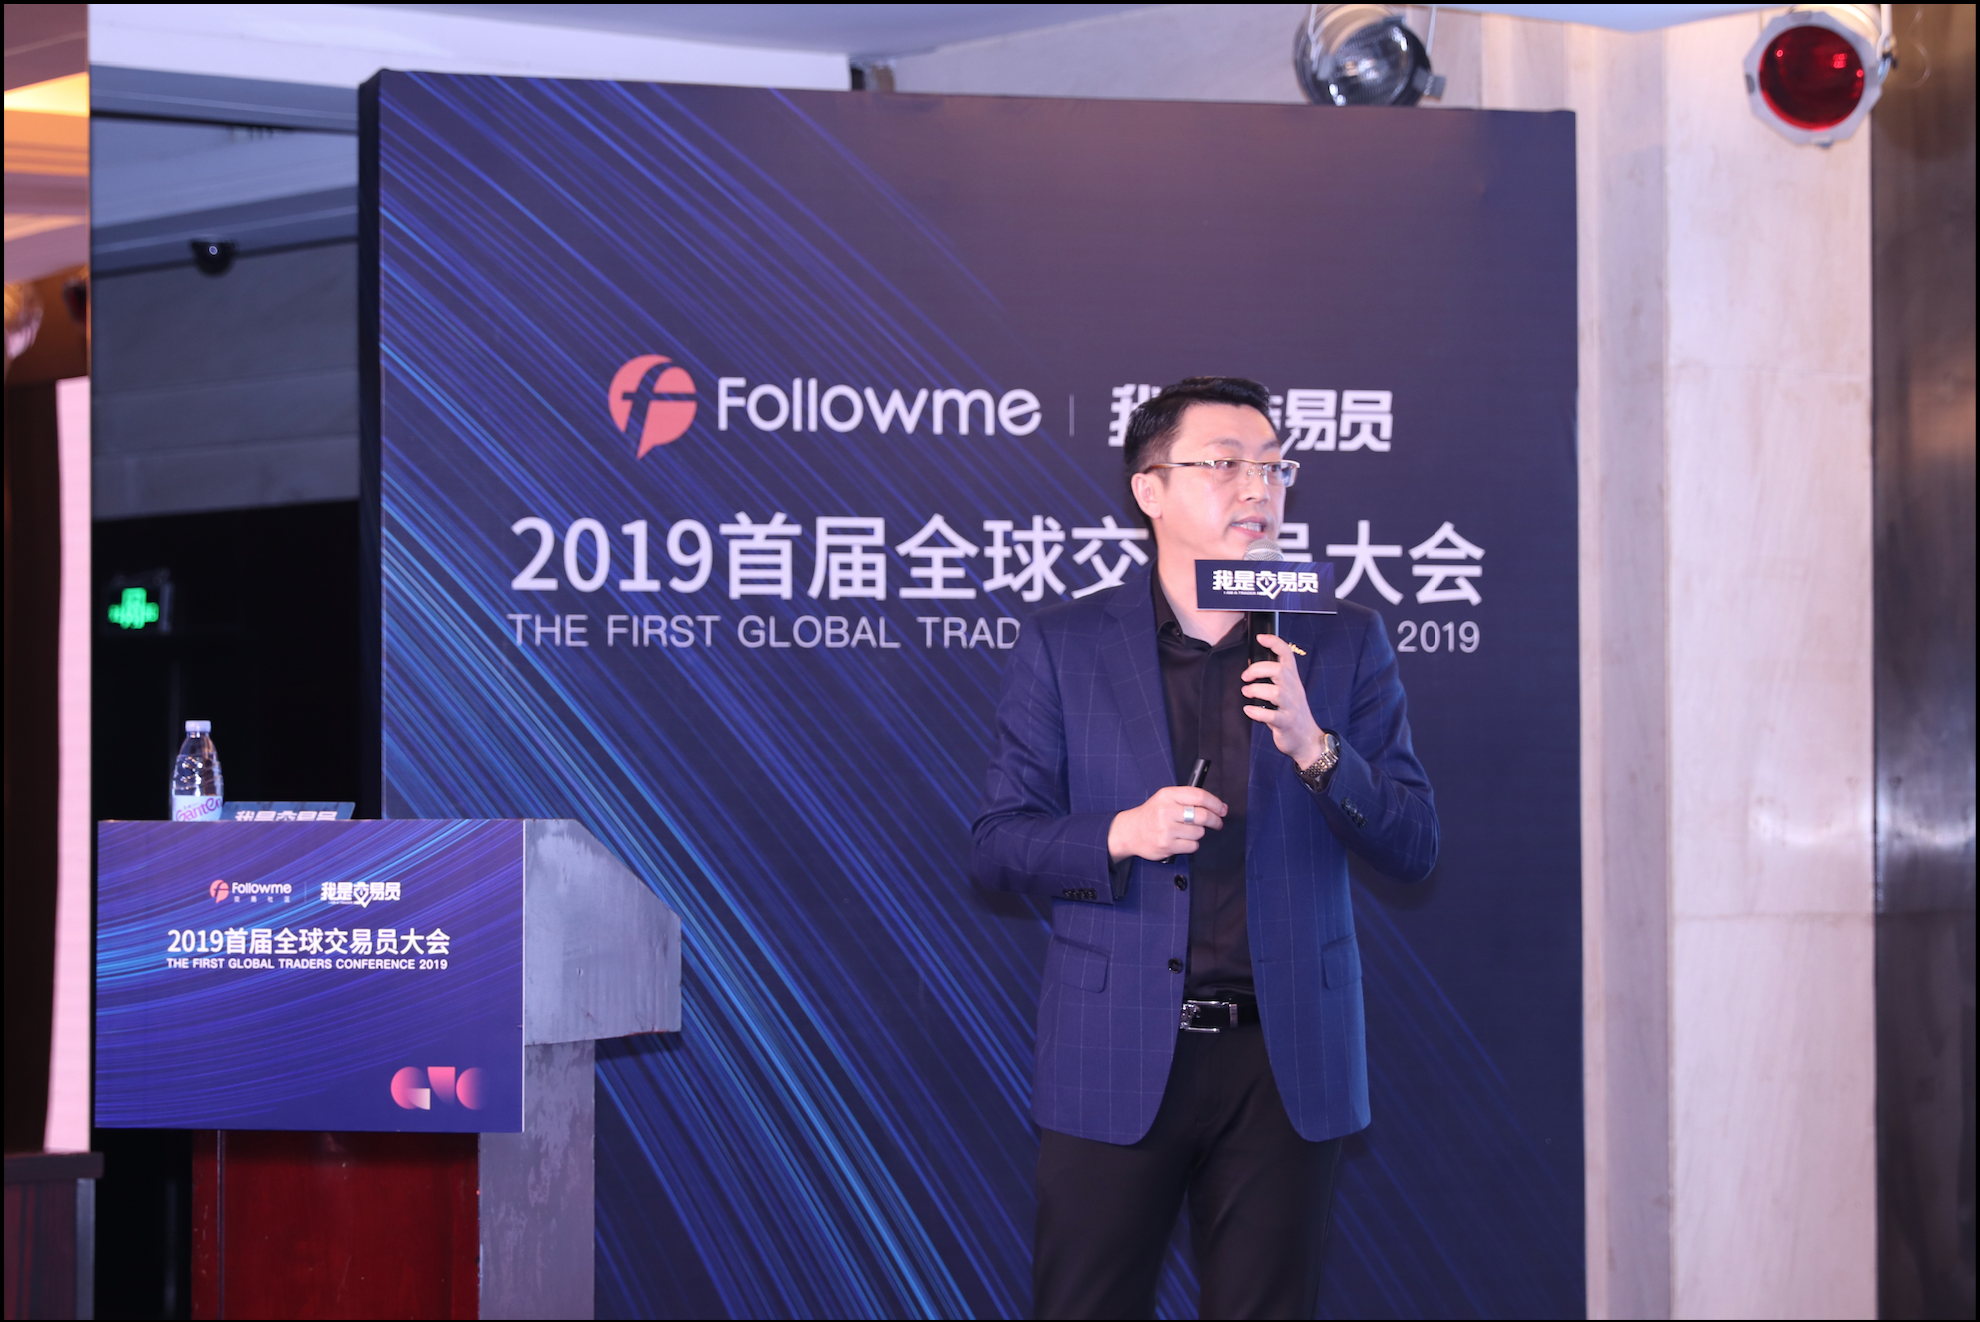 More Than Trade: Followme the First Global Trader Conference 2019